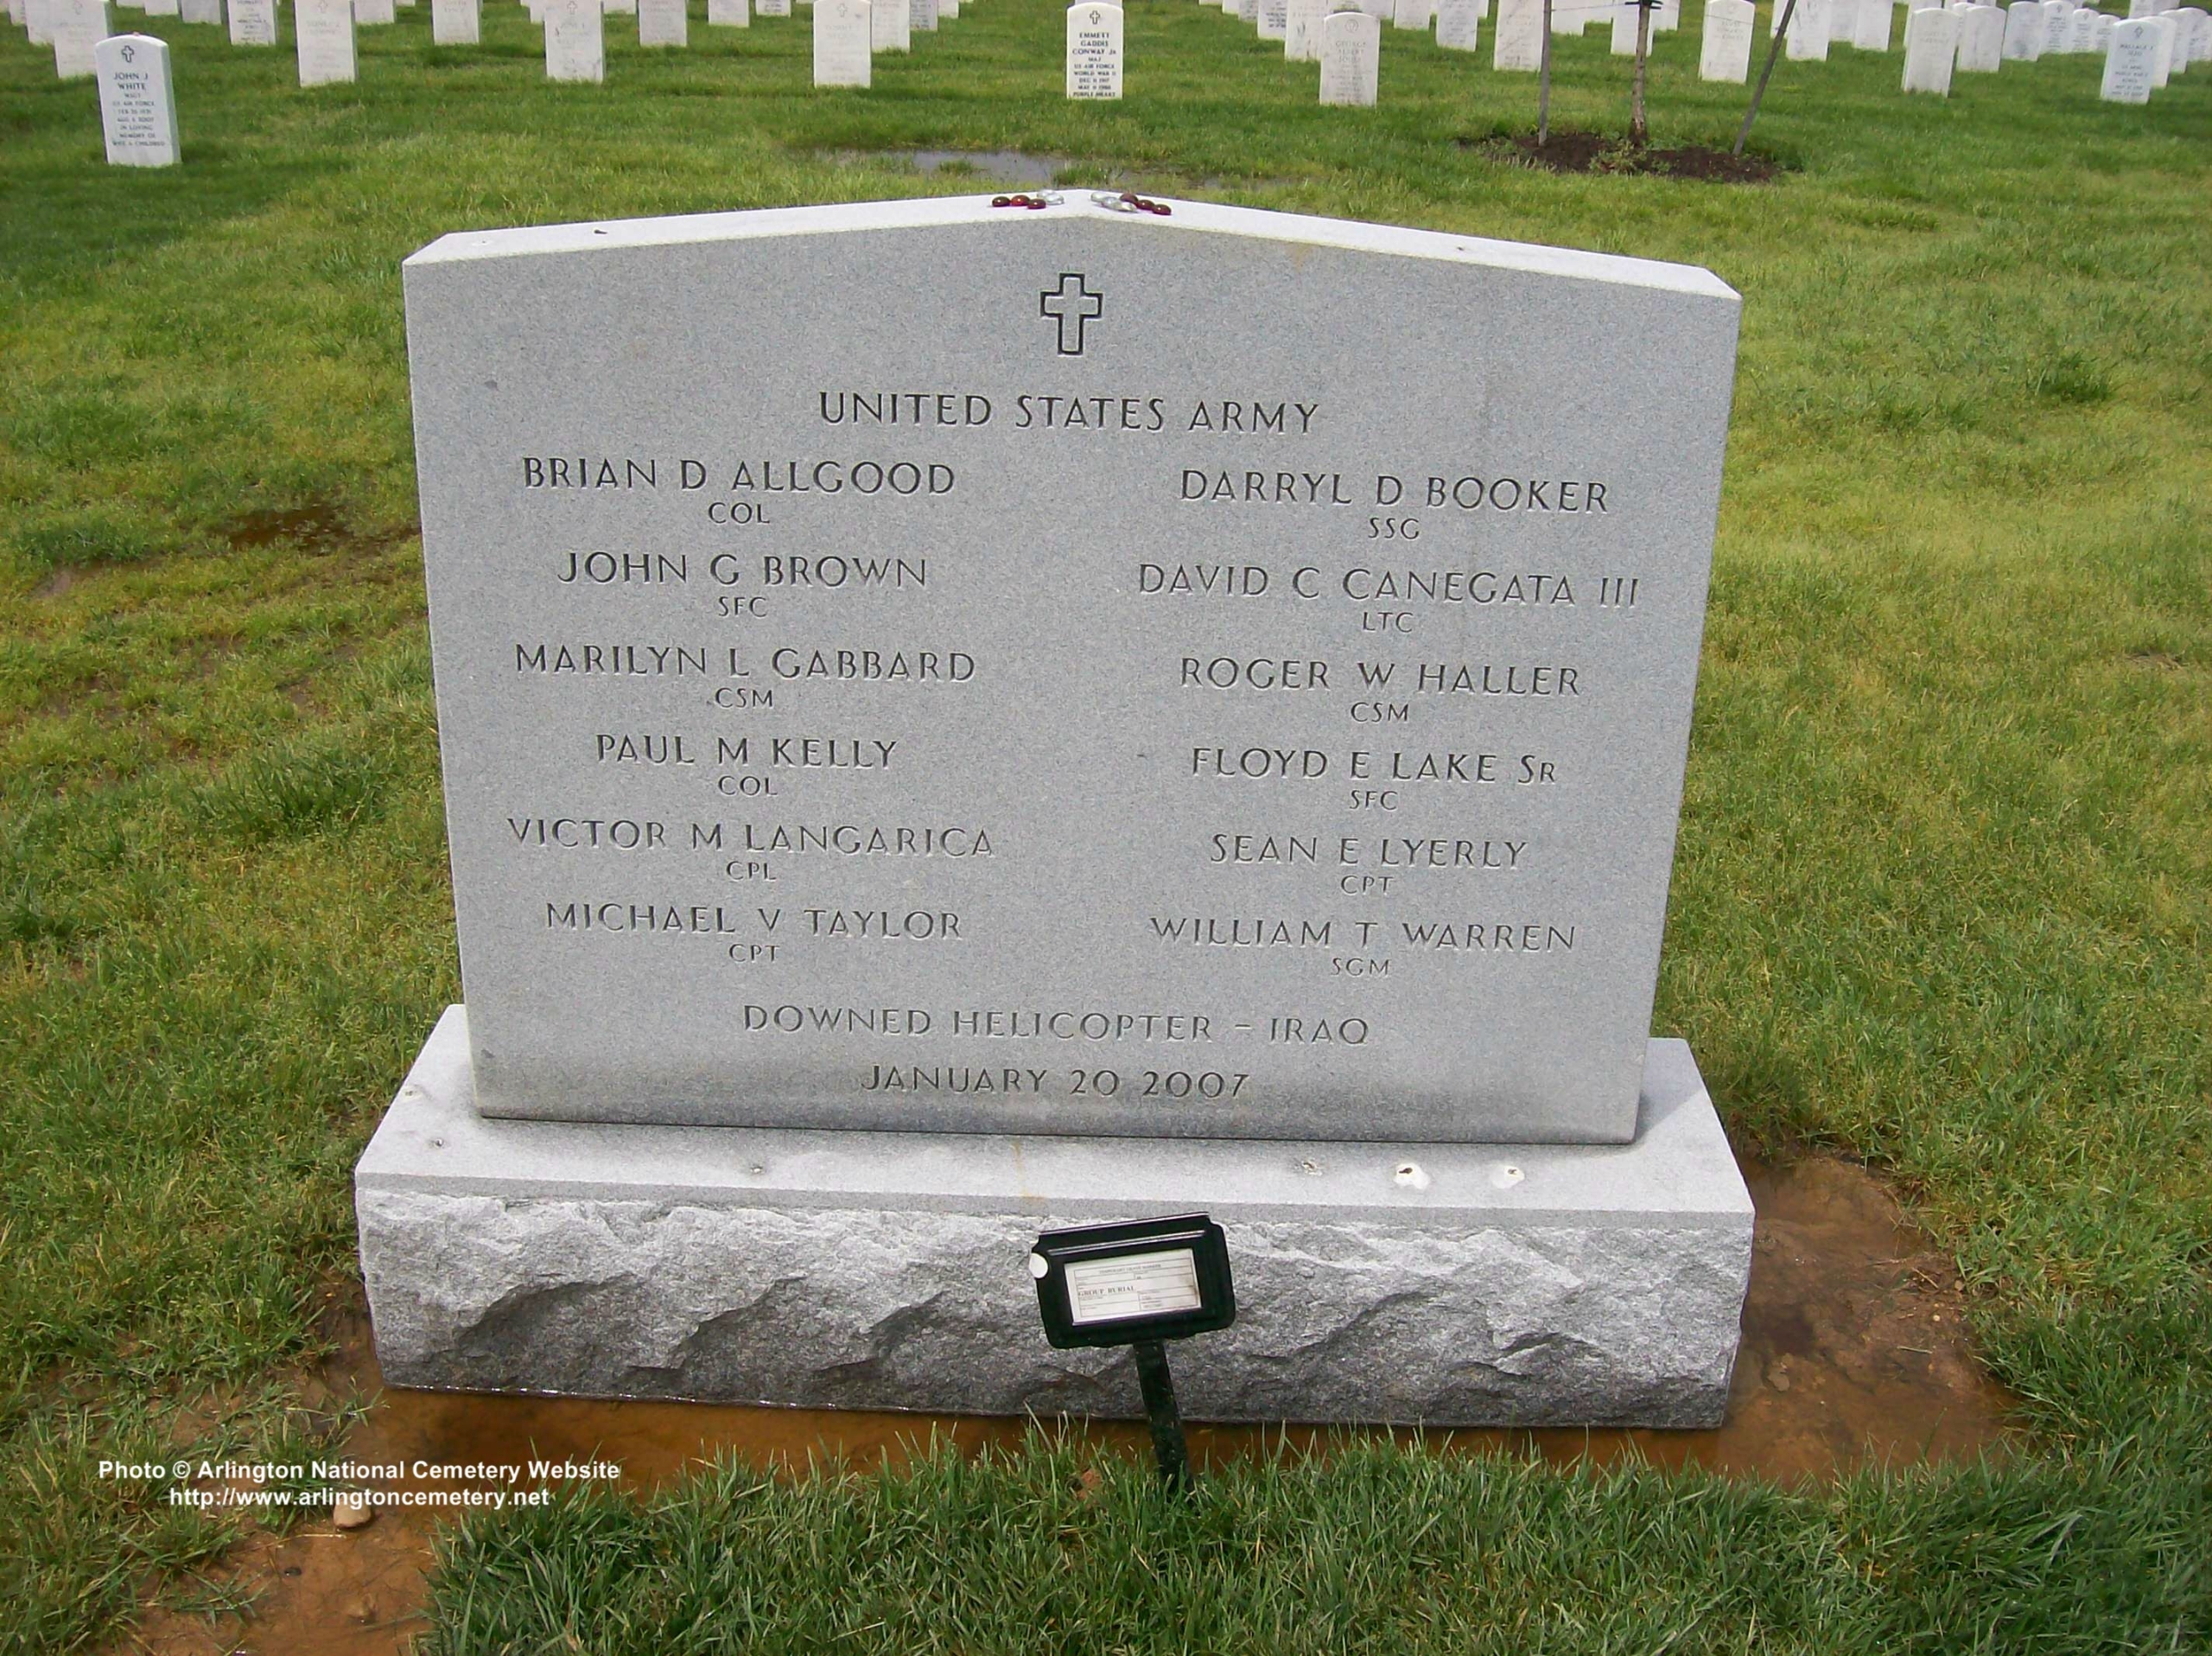 selyerly-gravesite-photo-may-2008-001